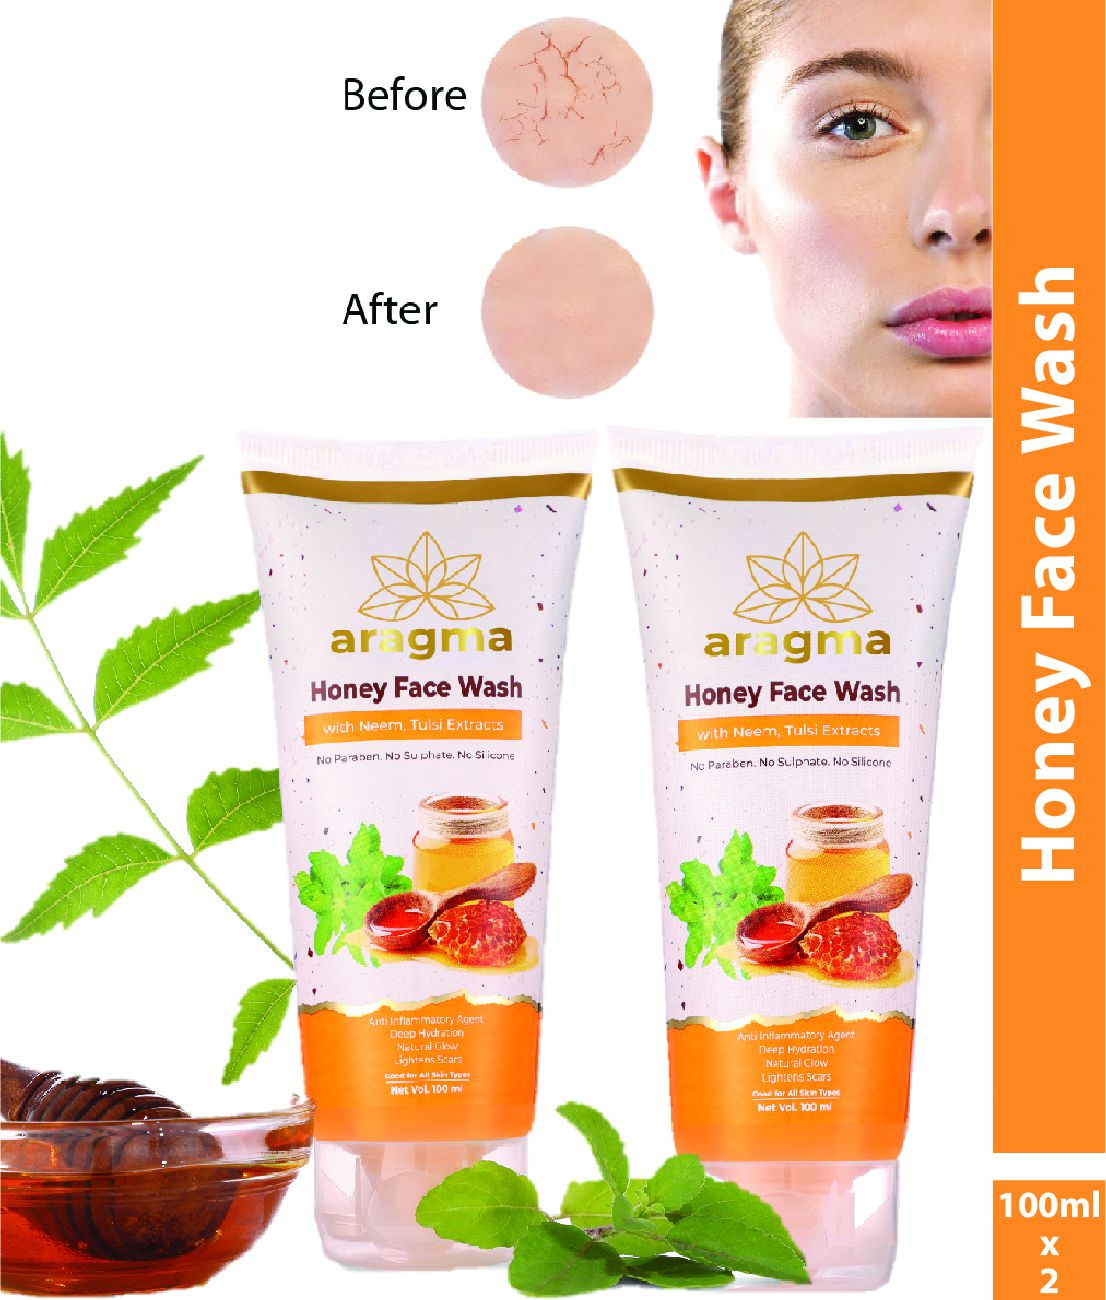     			Aragma Honey Face Wash with Neem & Tulsi Extracts, 100ml ( Pack of 2)